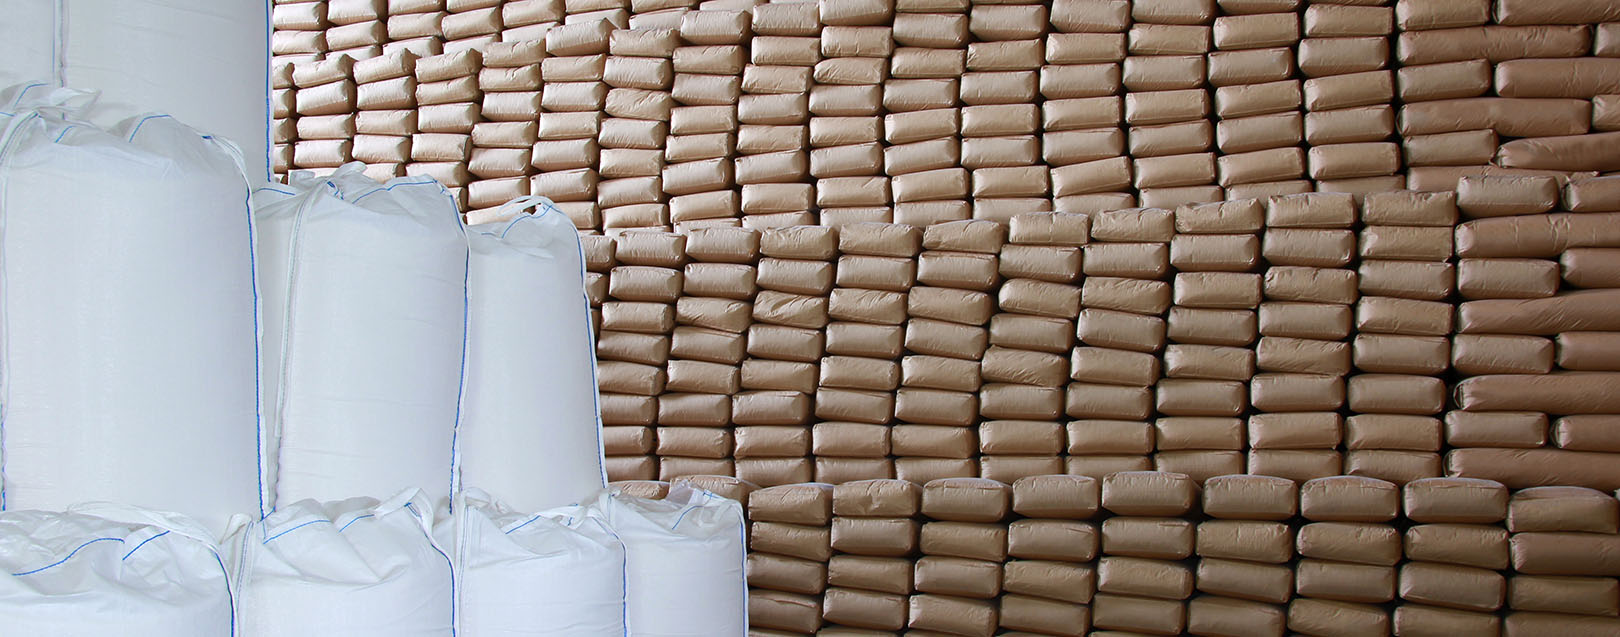 India may levy 25% customs duty on sugar exports